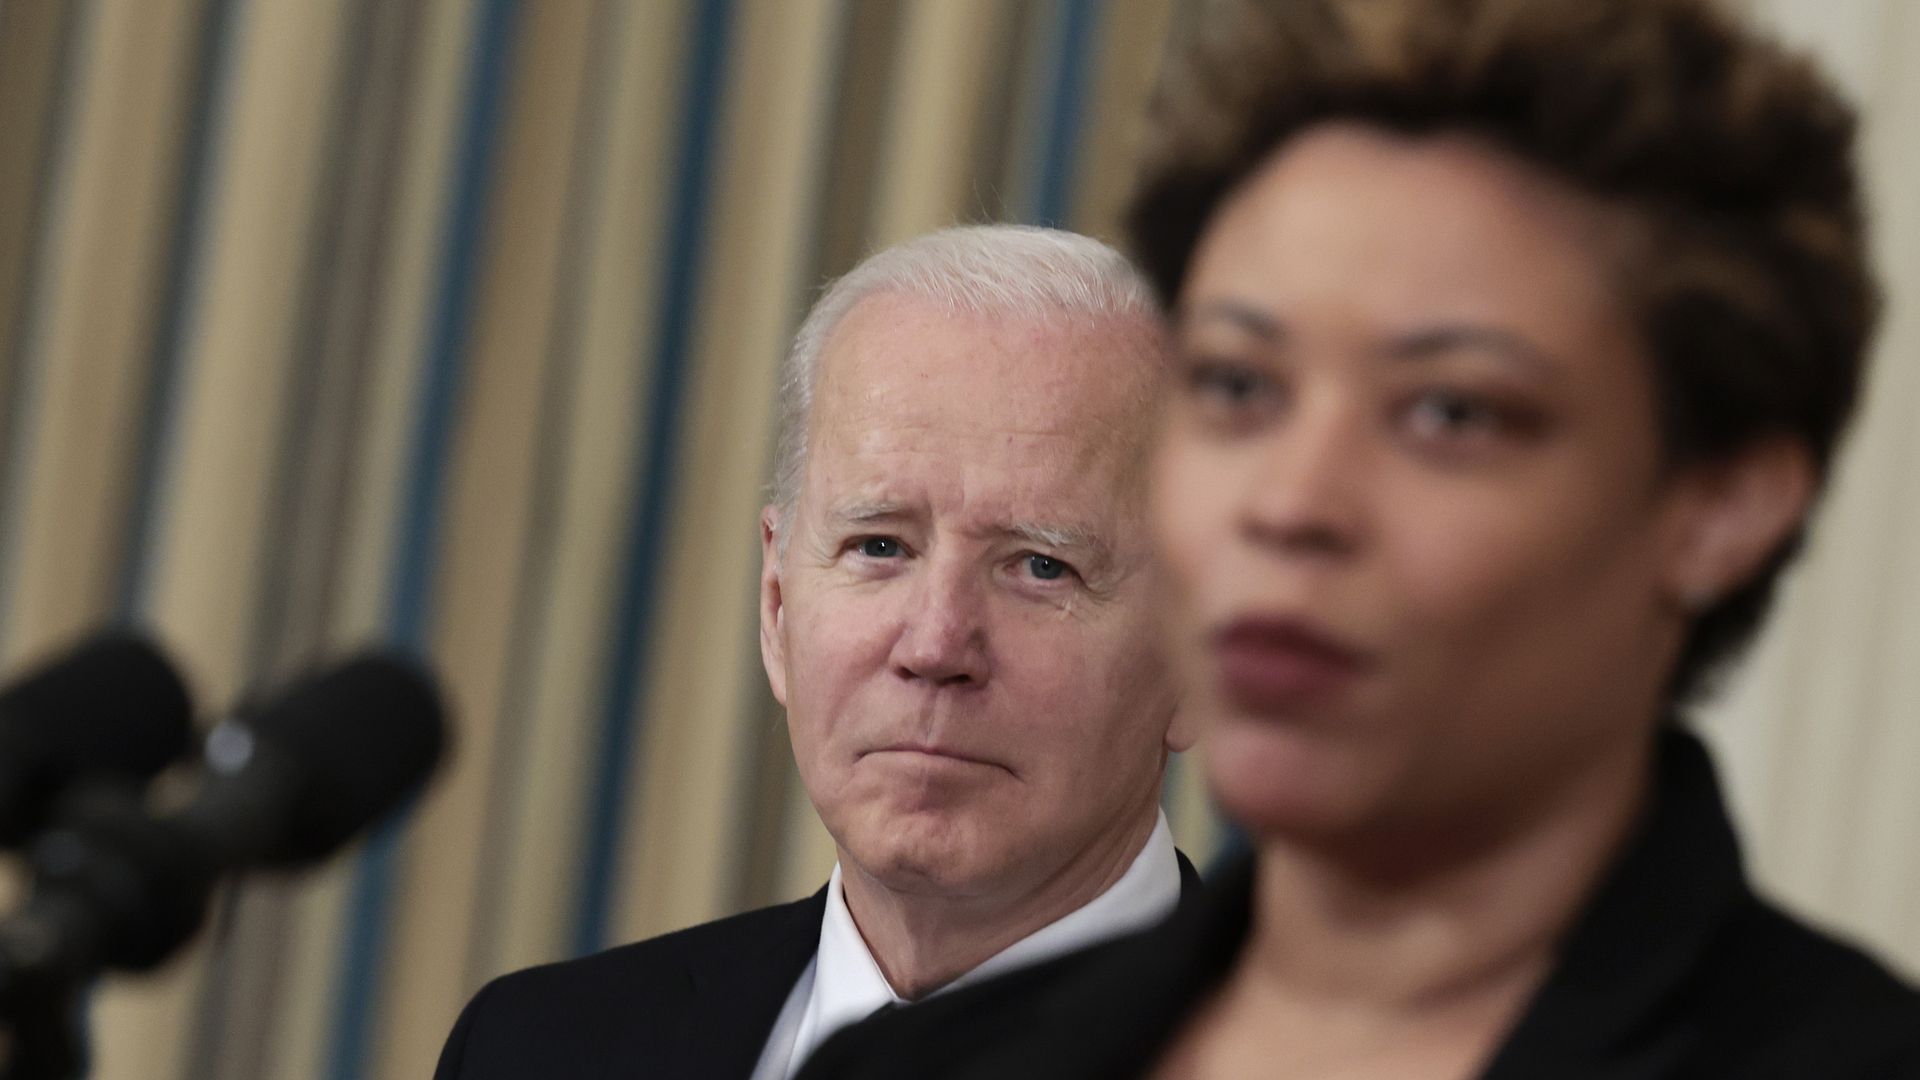 President Biden is seen looking on as OMB Director Shalanda Young speaks about his FY2023 budget.